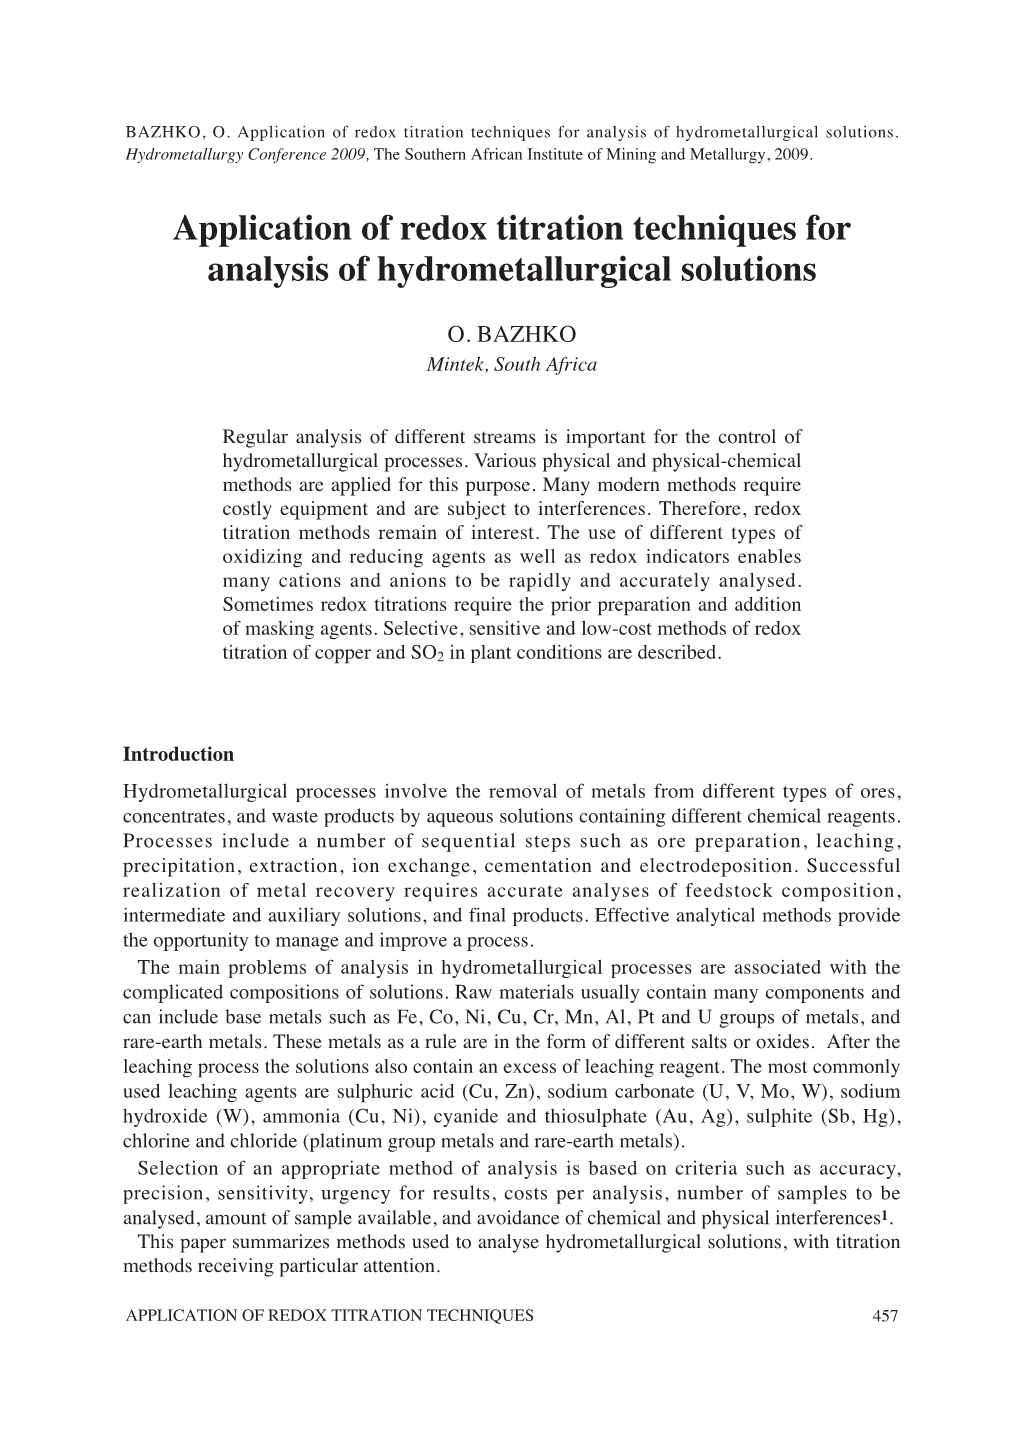 Application of Redox Titration Techniques for Analysis of Hydrometallurgical Solutions